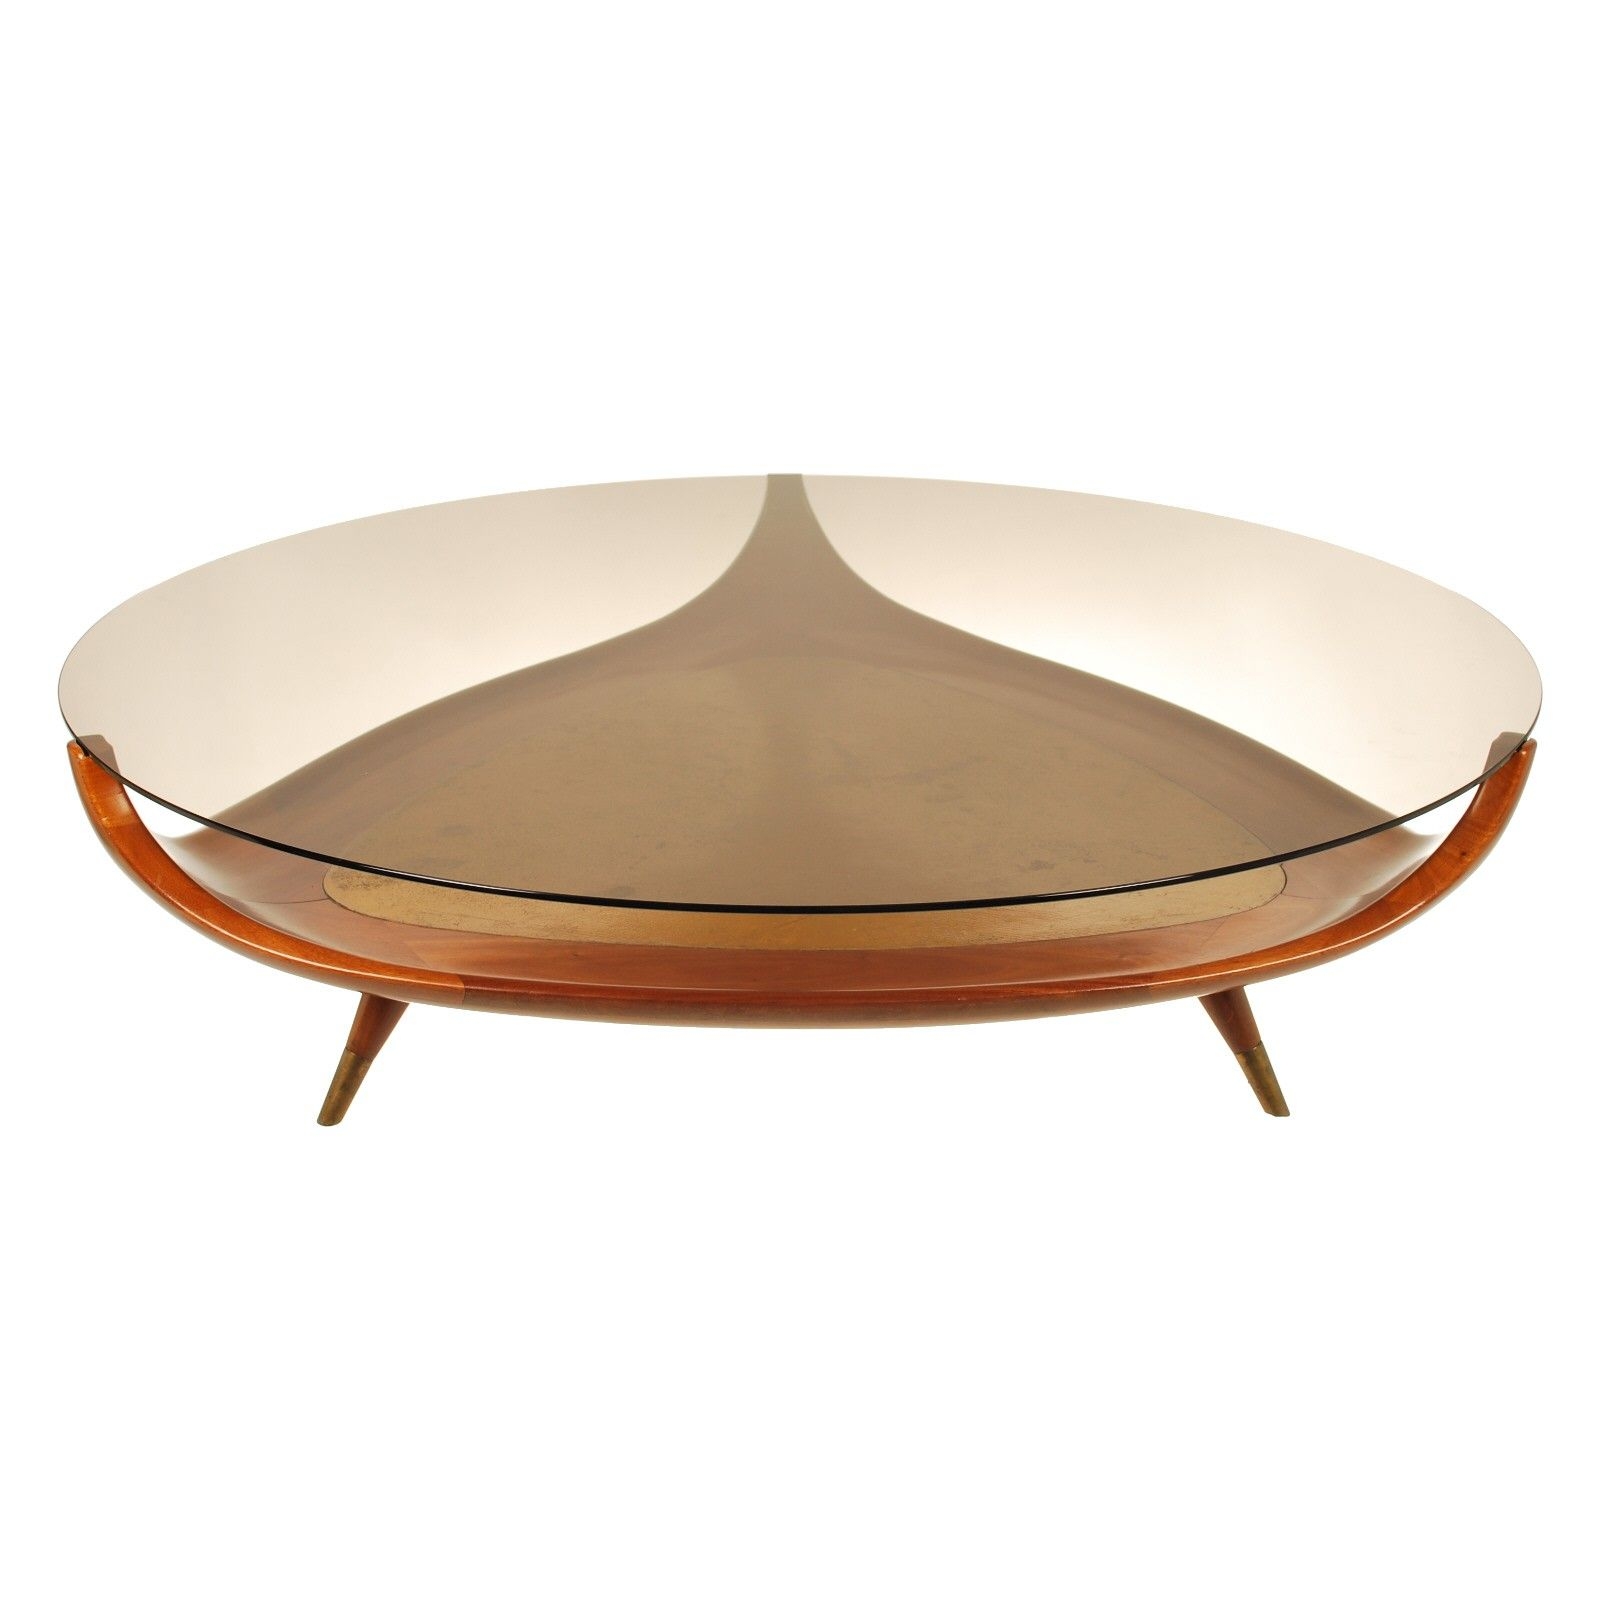 Round wood and glass coffee table 2